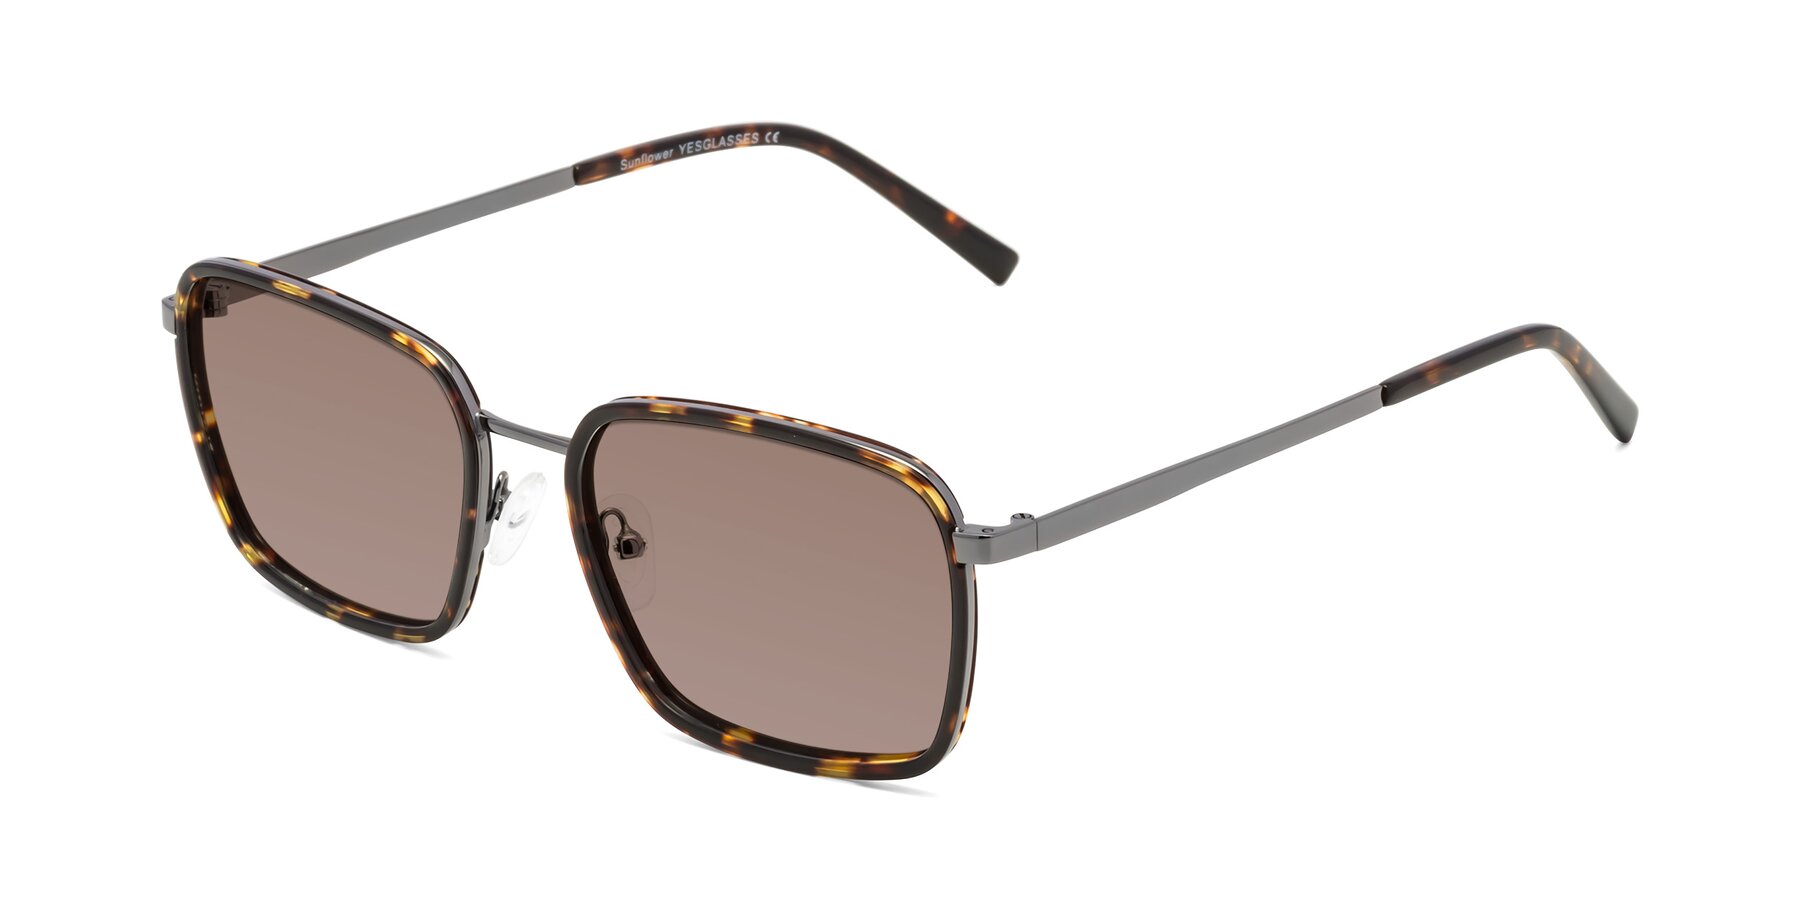 Angle of Sunflower in Tortoise-Gunmetal with Medium Brown Tinted Lenses